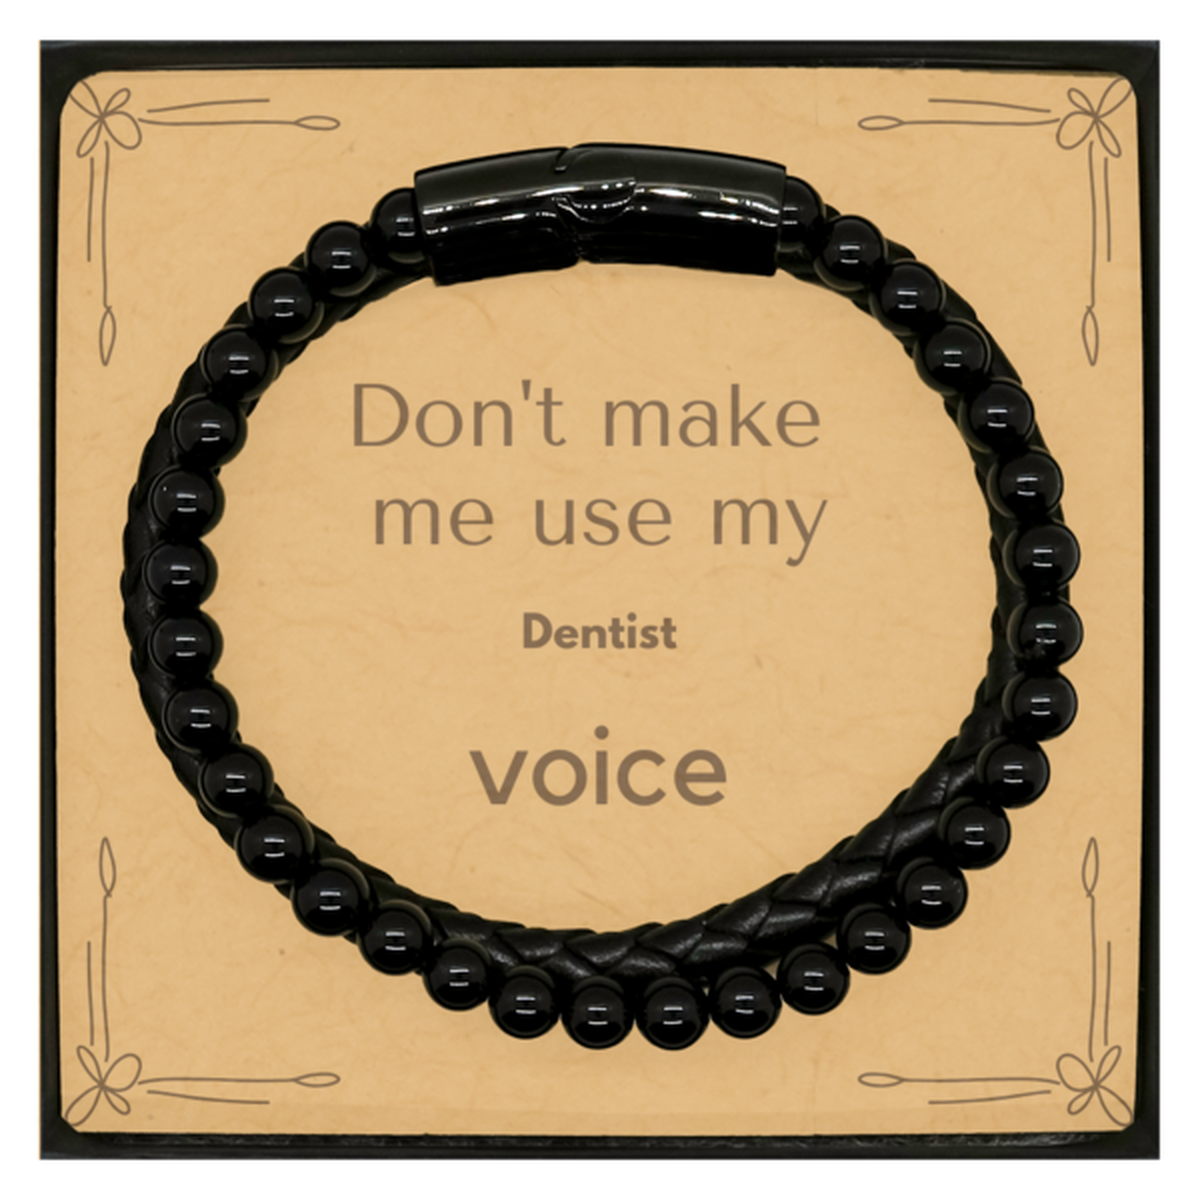 Don't make me use my Dentist voice, Sarcasm Dentist Card Gifts, Christmas Dentist Stone Leather Bracelets Birthday Unique Gifts For Dentist Coworkers, Men, Women, Colleague, Friends